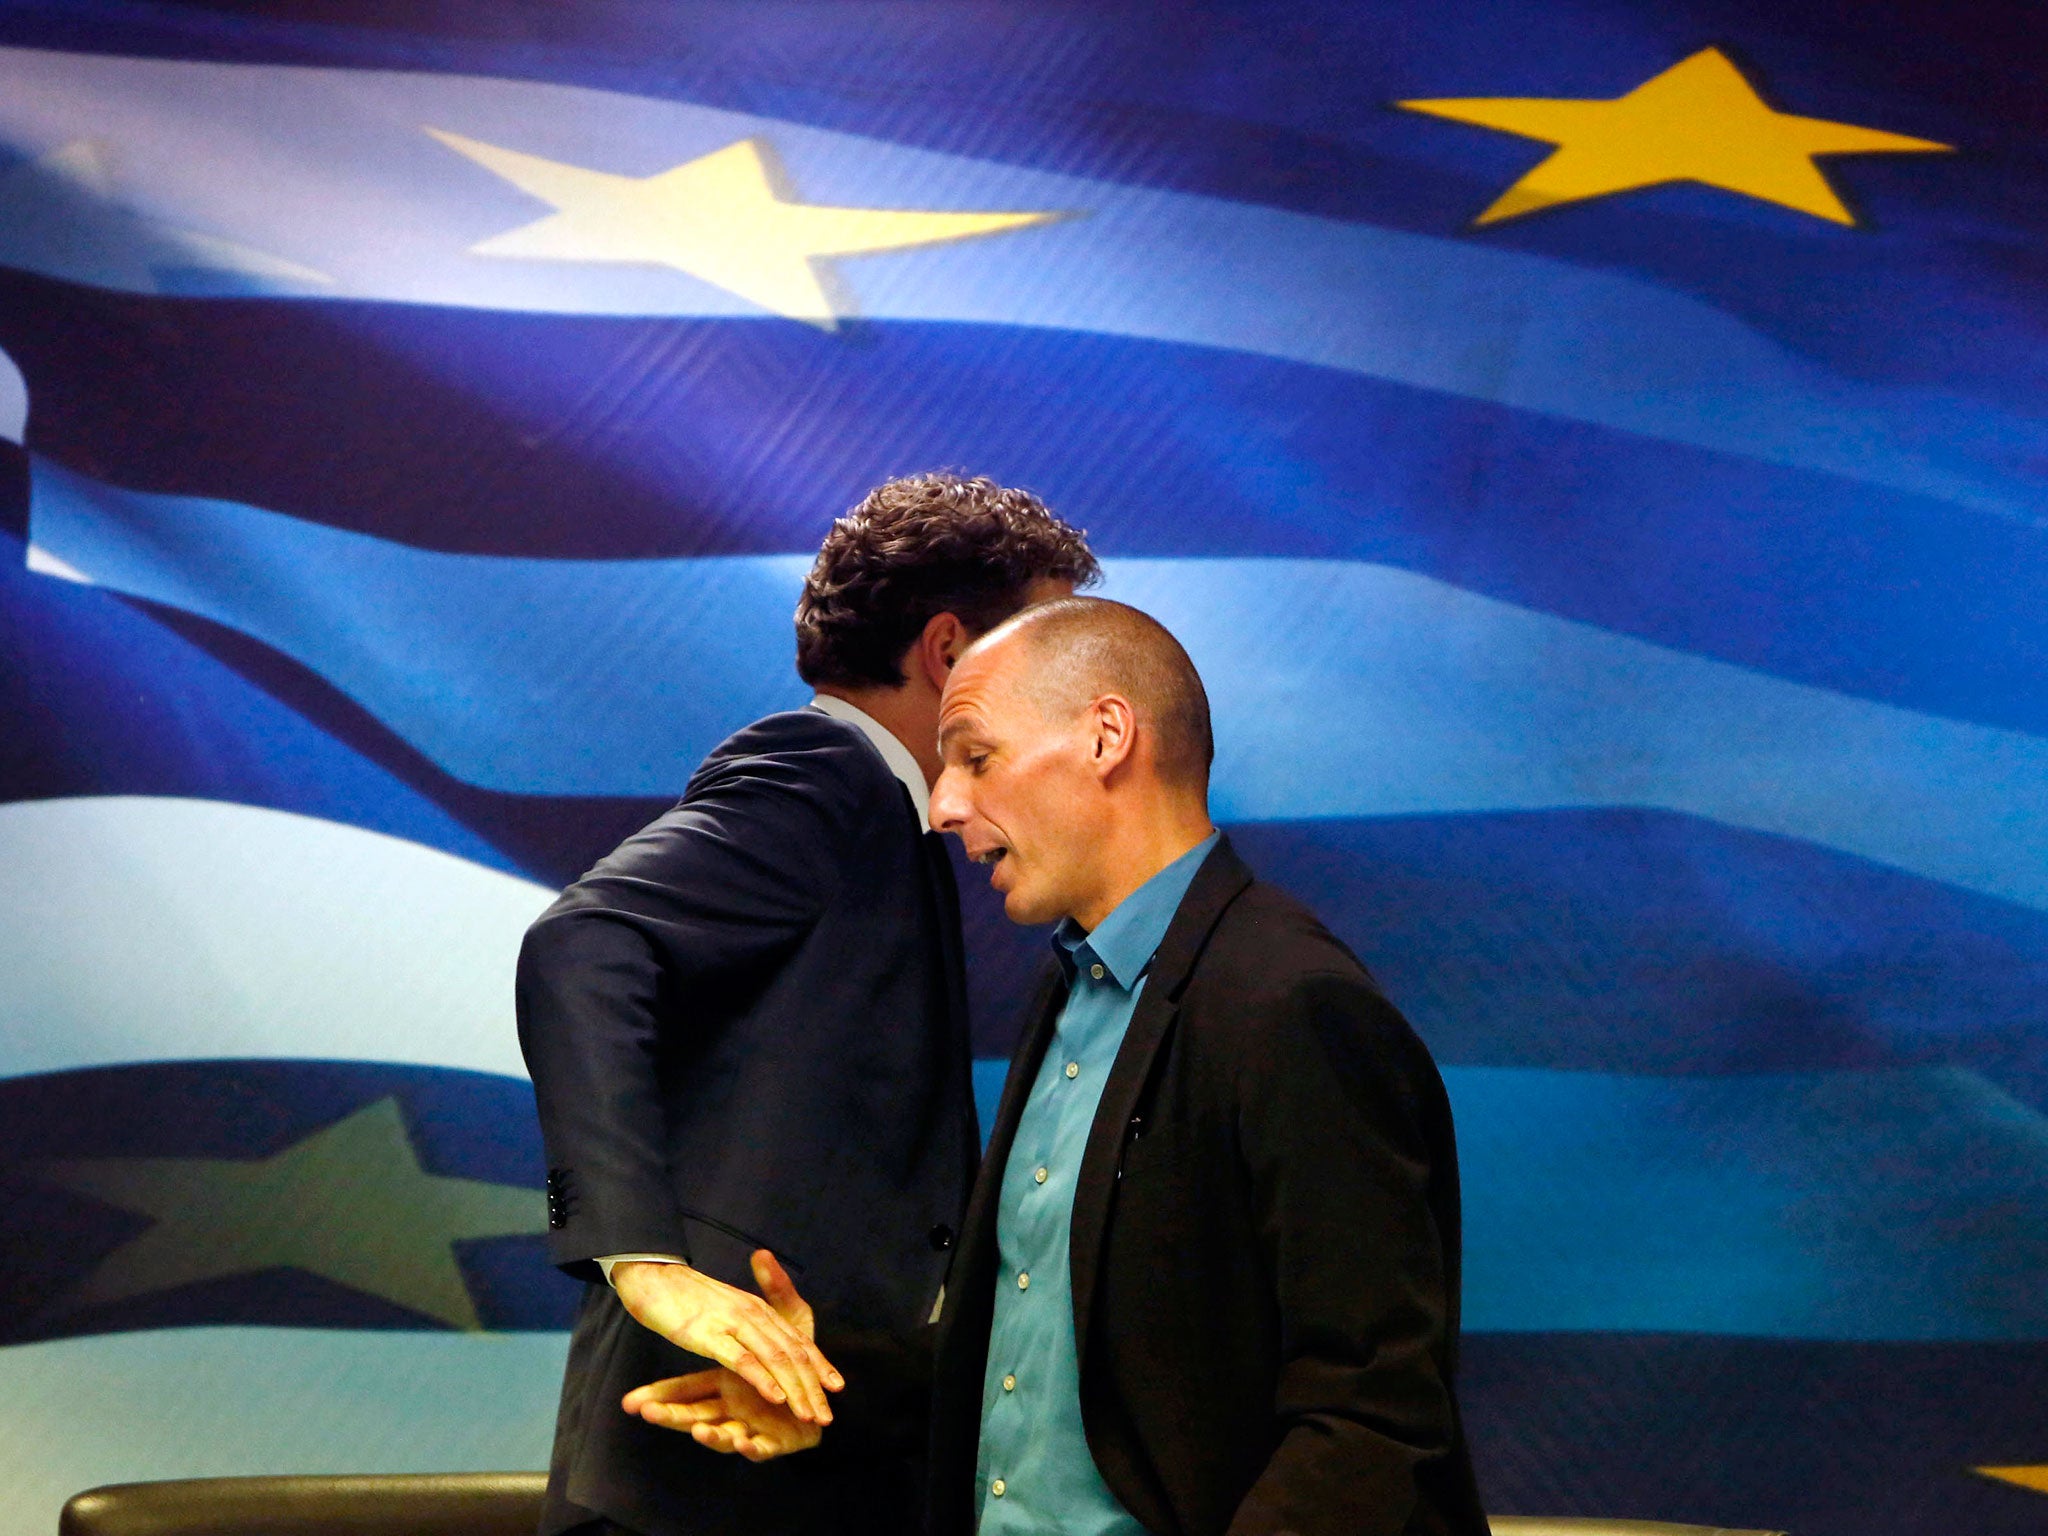 Jeroen Dijsselbloem, (L) head of the euro zone finance ministers' group, and Greek Finance Minister Yanis Varoufakis shake hands after their common press conference at the ministry in Athens. Greece's government will not cooperate with the EU and IMF miss